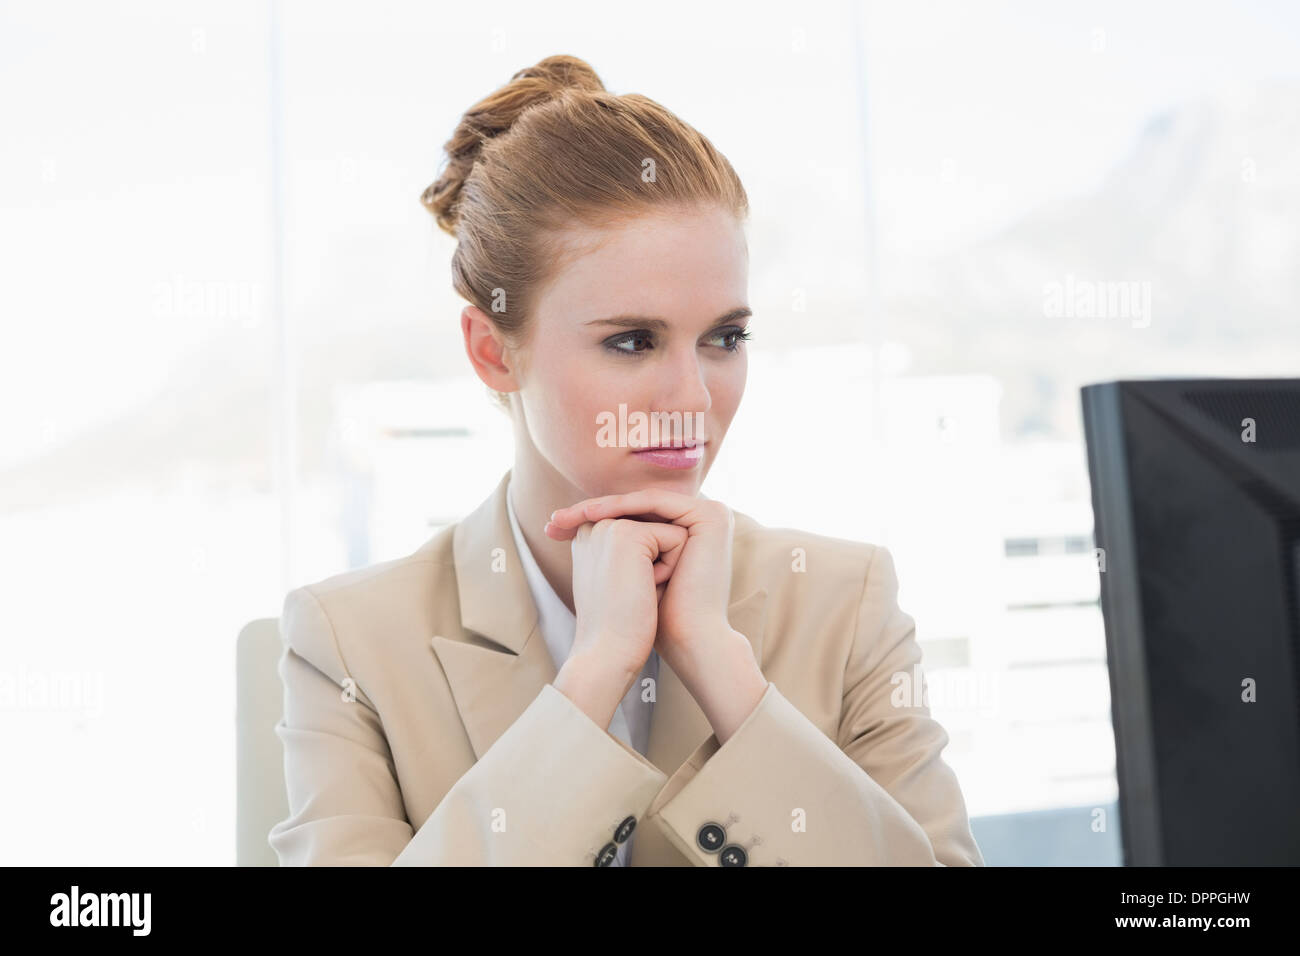 Worried young businesswoman looking at computer Stock Photo